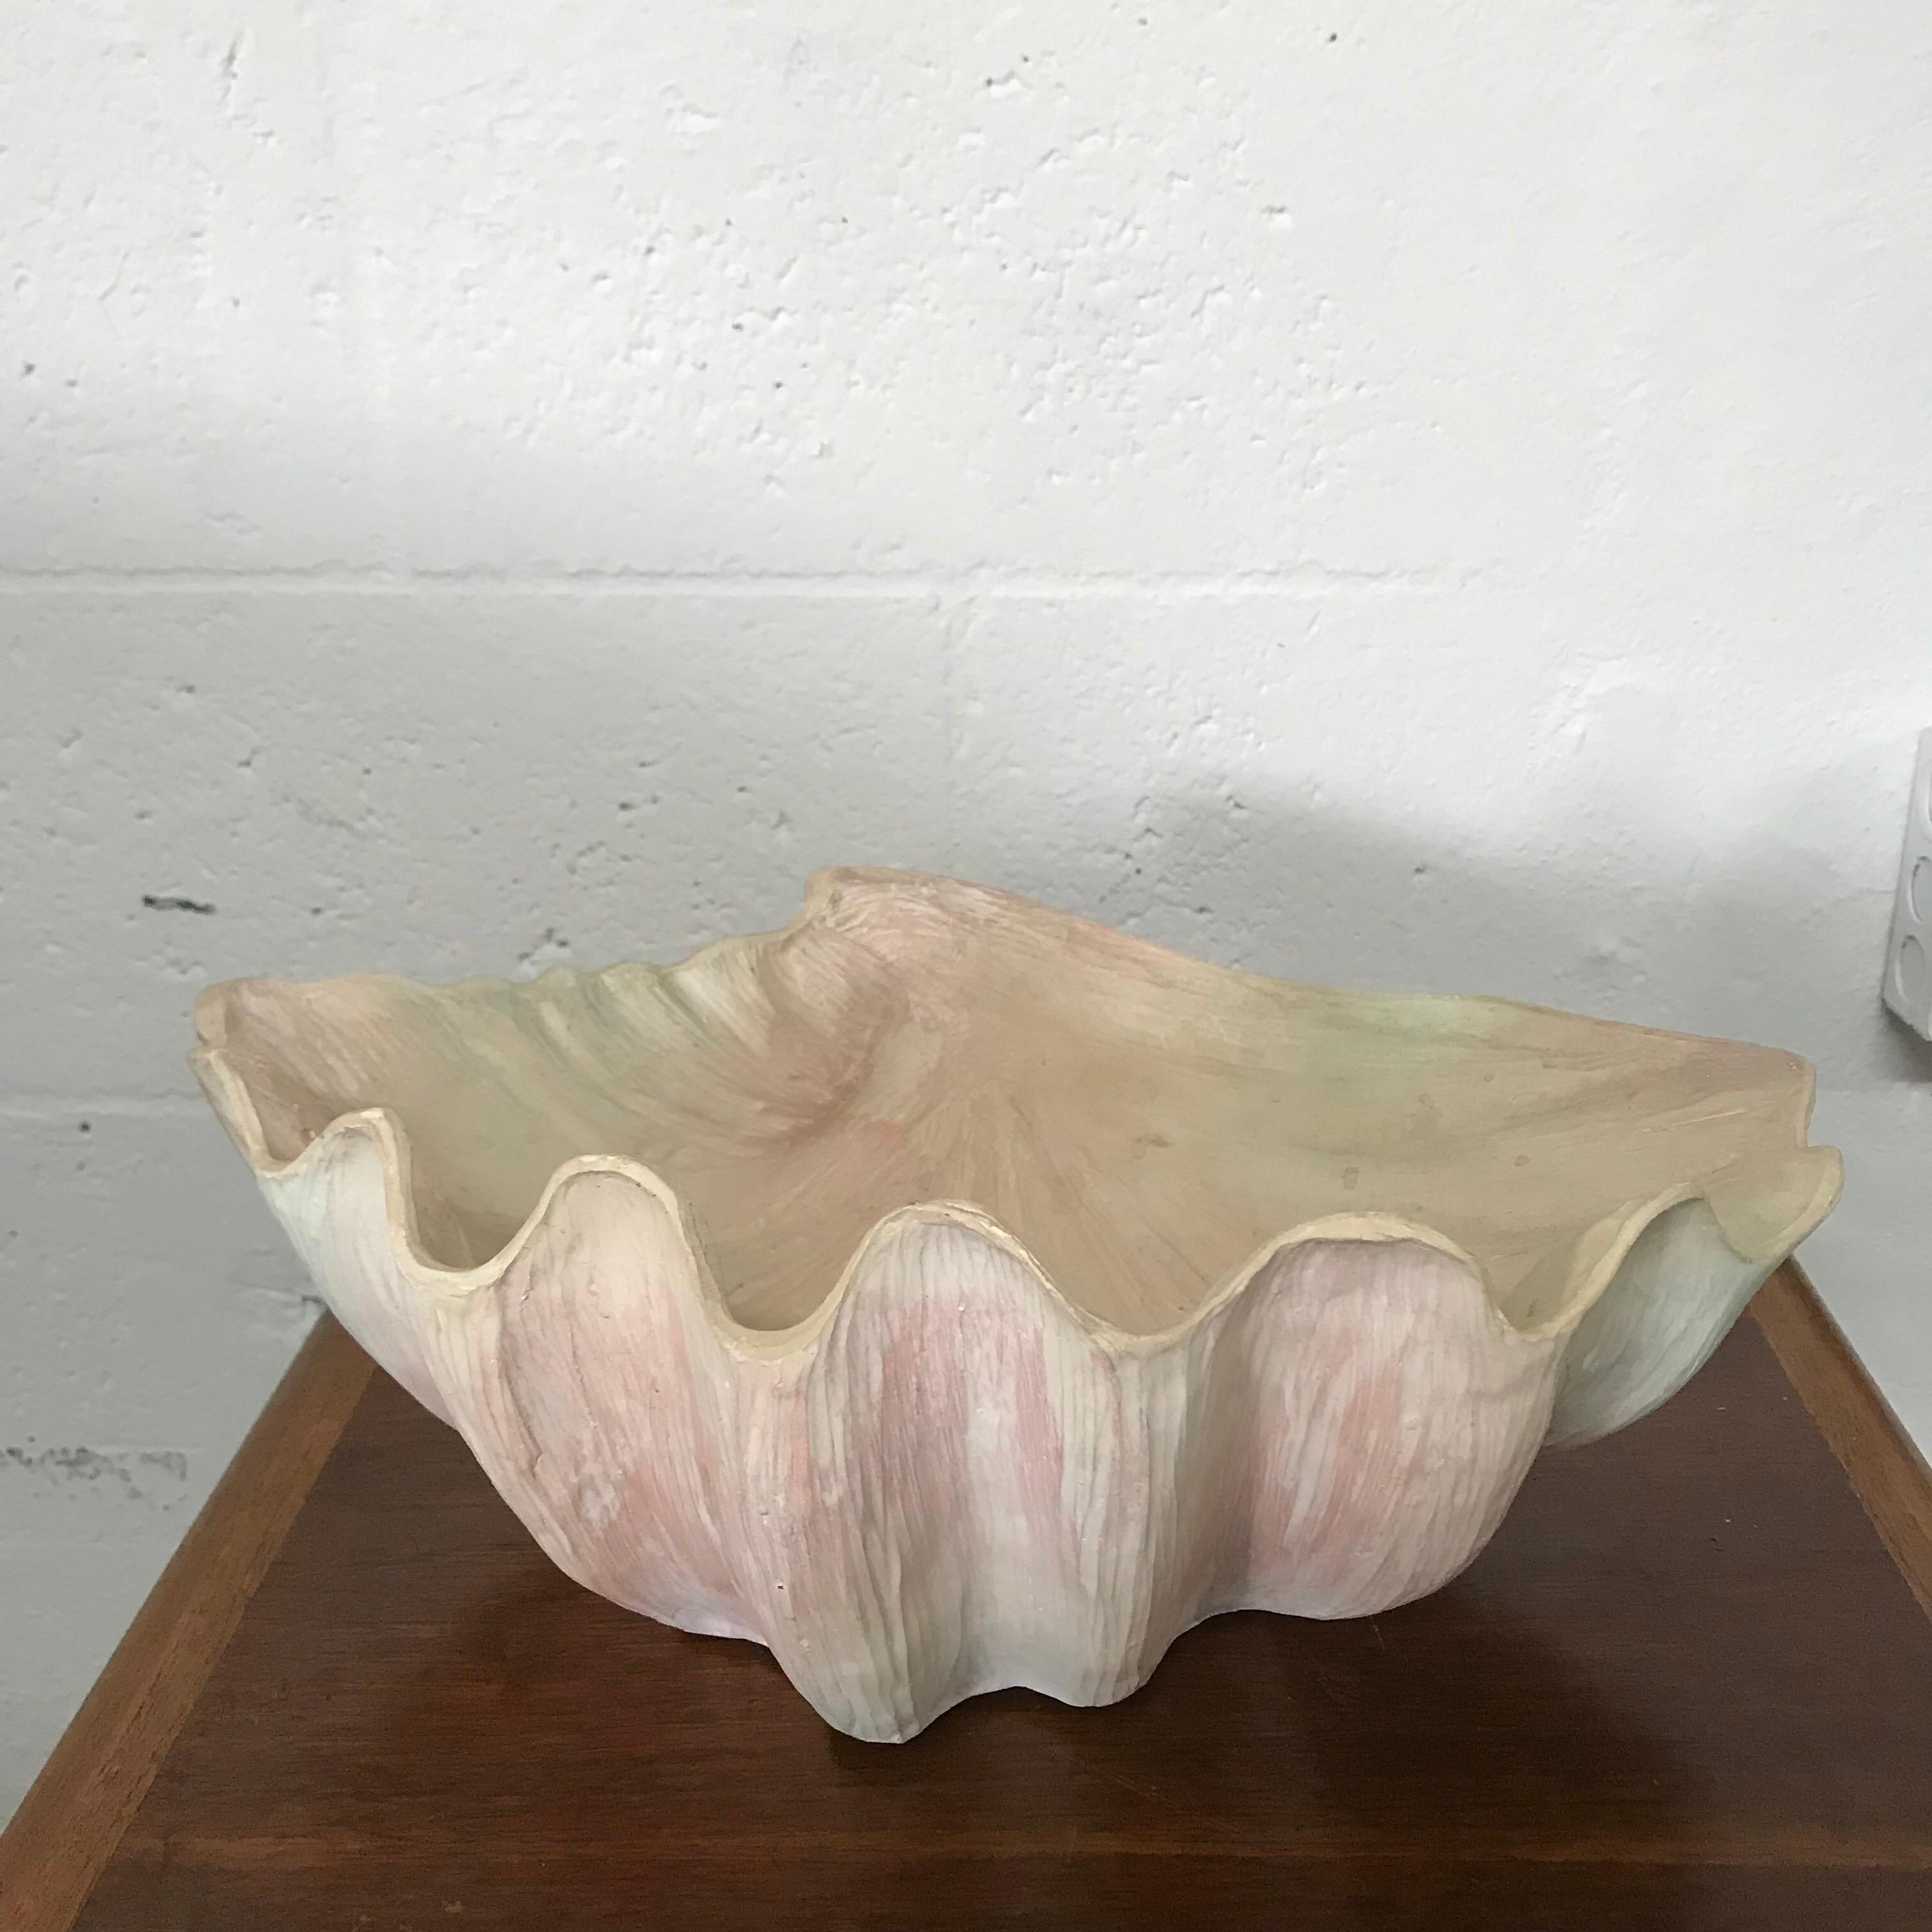 Wood bowl carved in the shape of a shell, nautical motif, cerused and white washed wood finish.